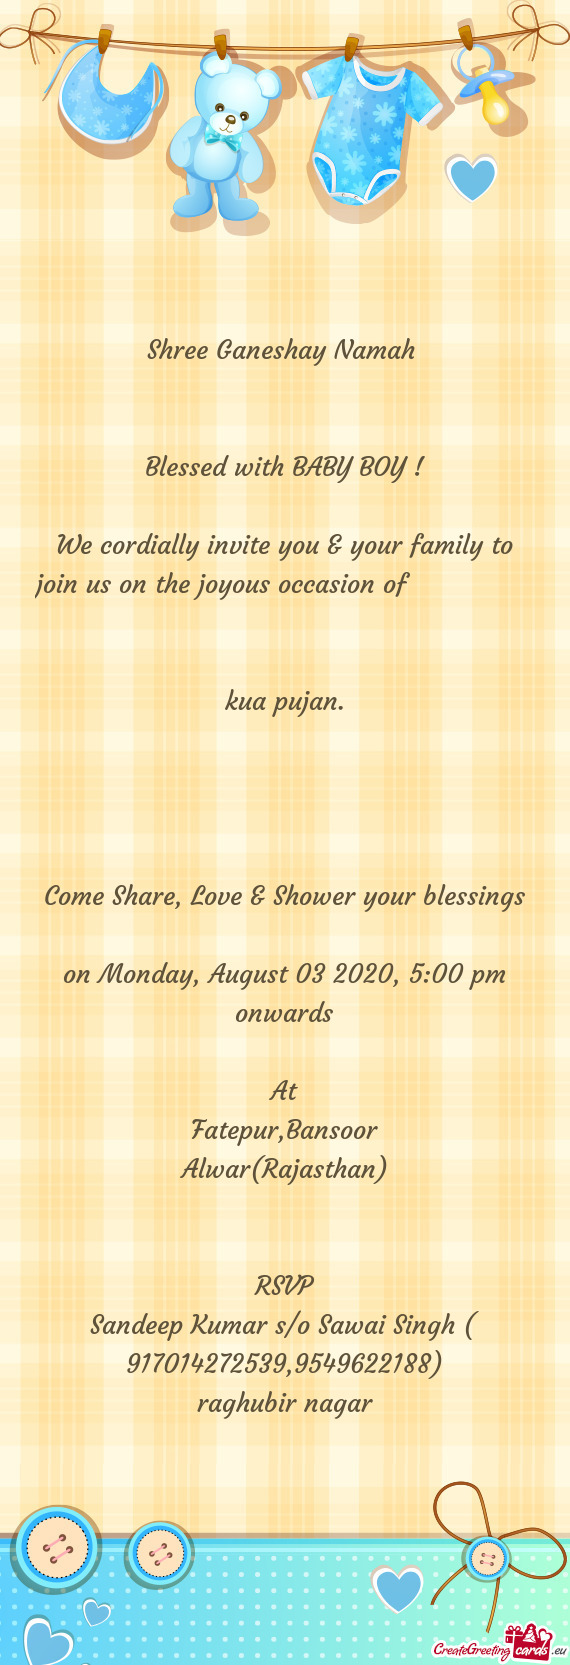 On Monday, August 03 2020, 5:00 pm onwards